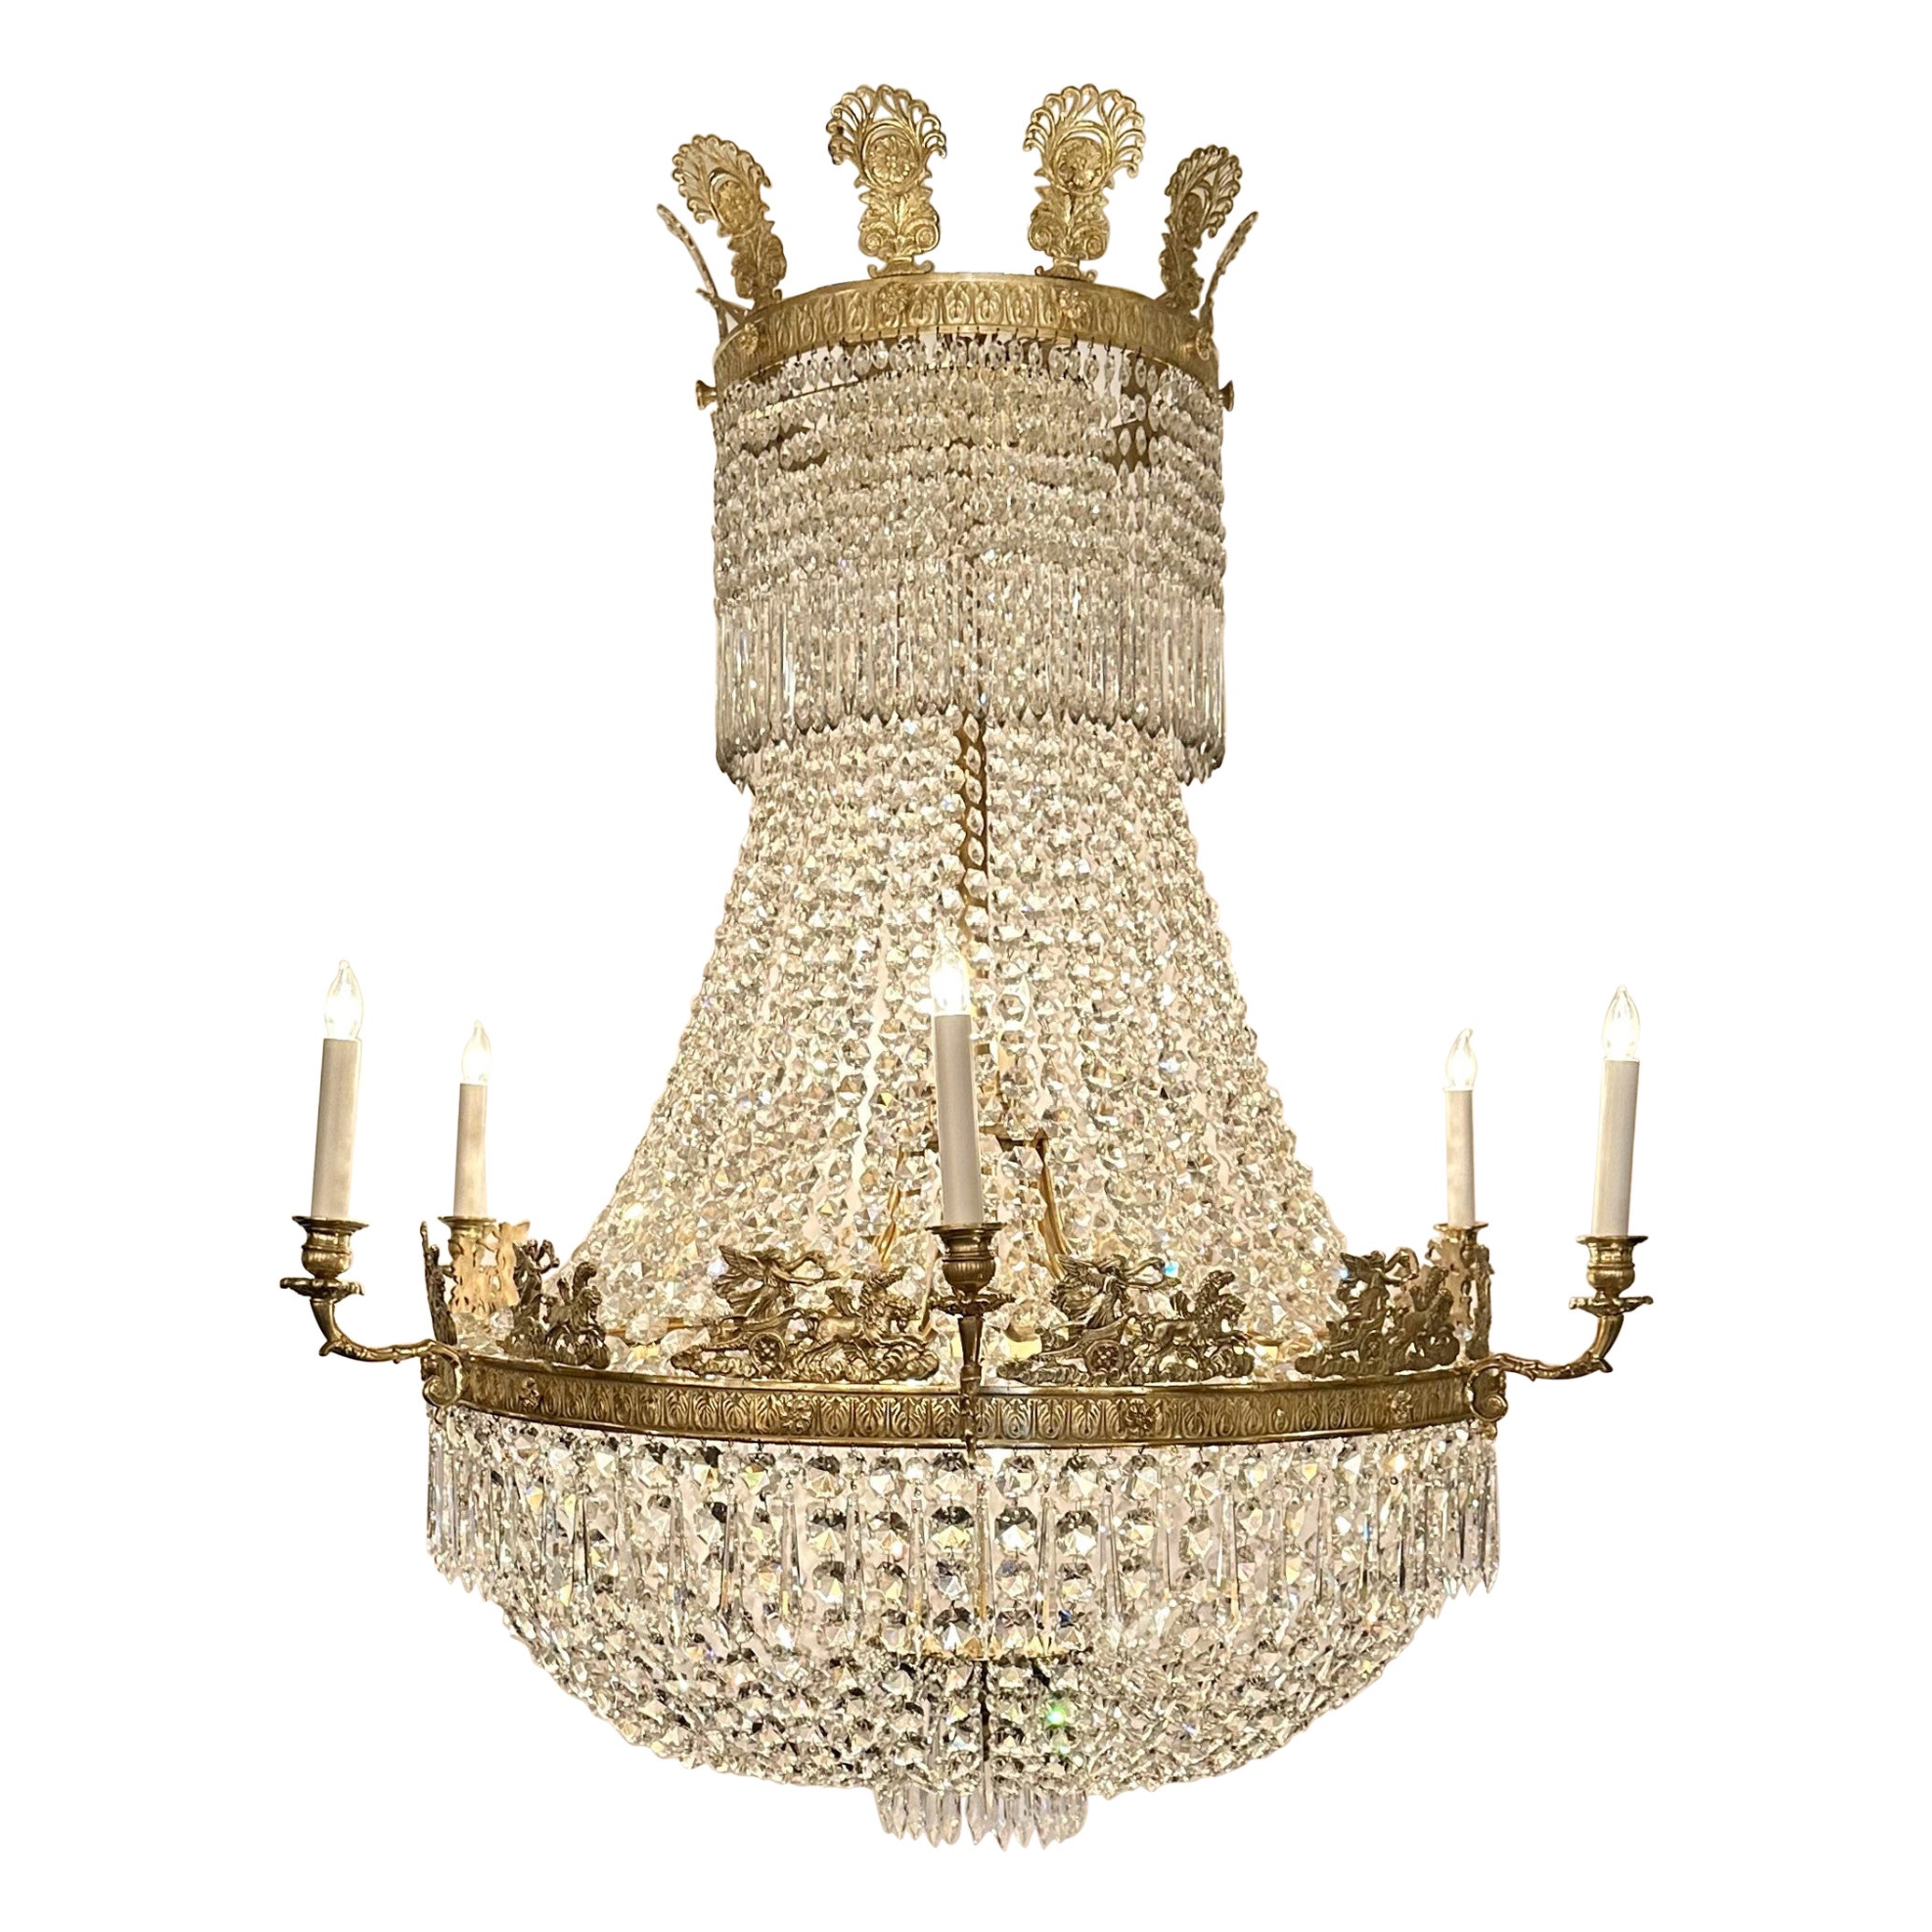 Antique 19th Century French Empire Baccarat Crystal and Ormolu Chandelier. For Sale